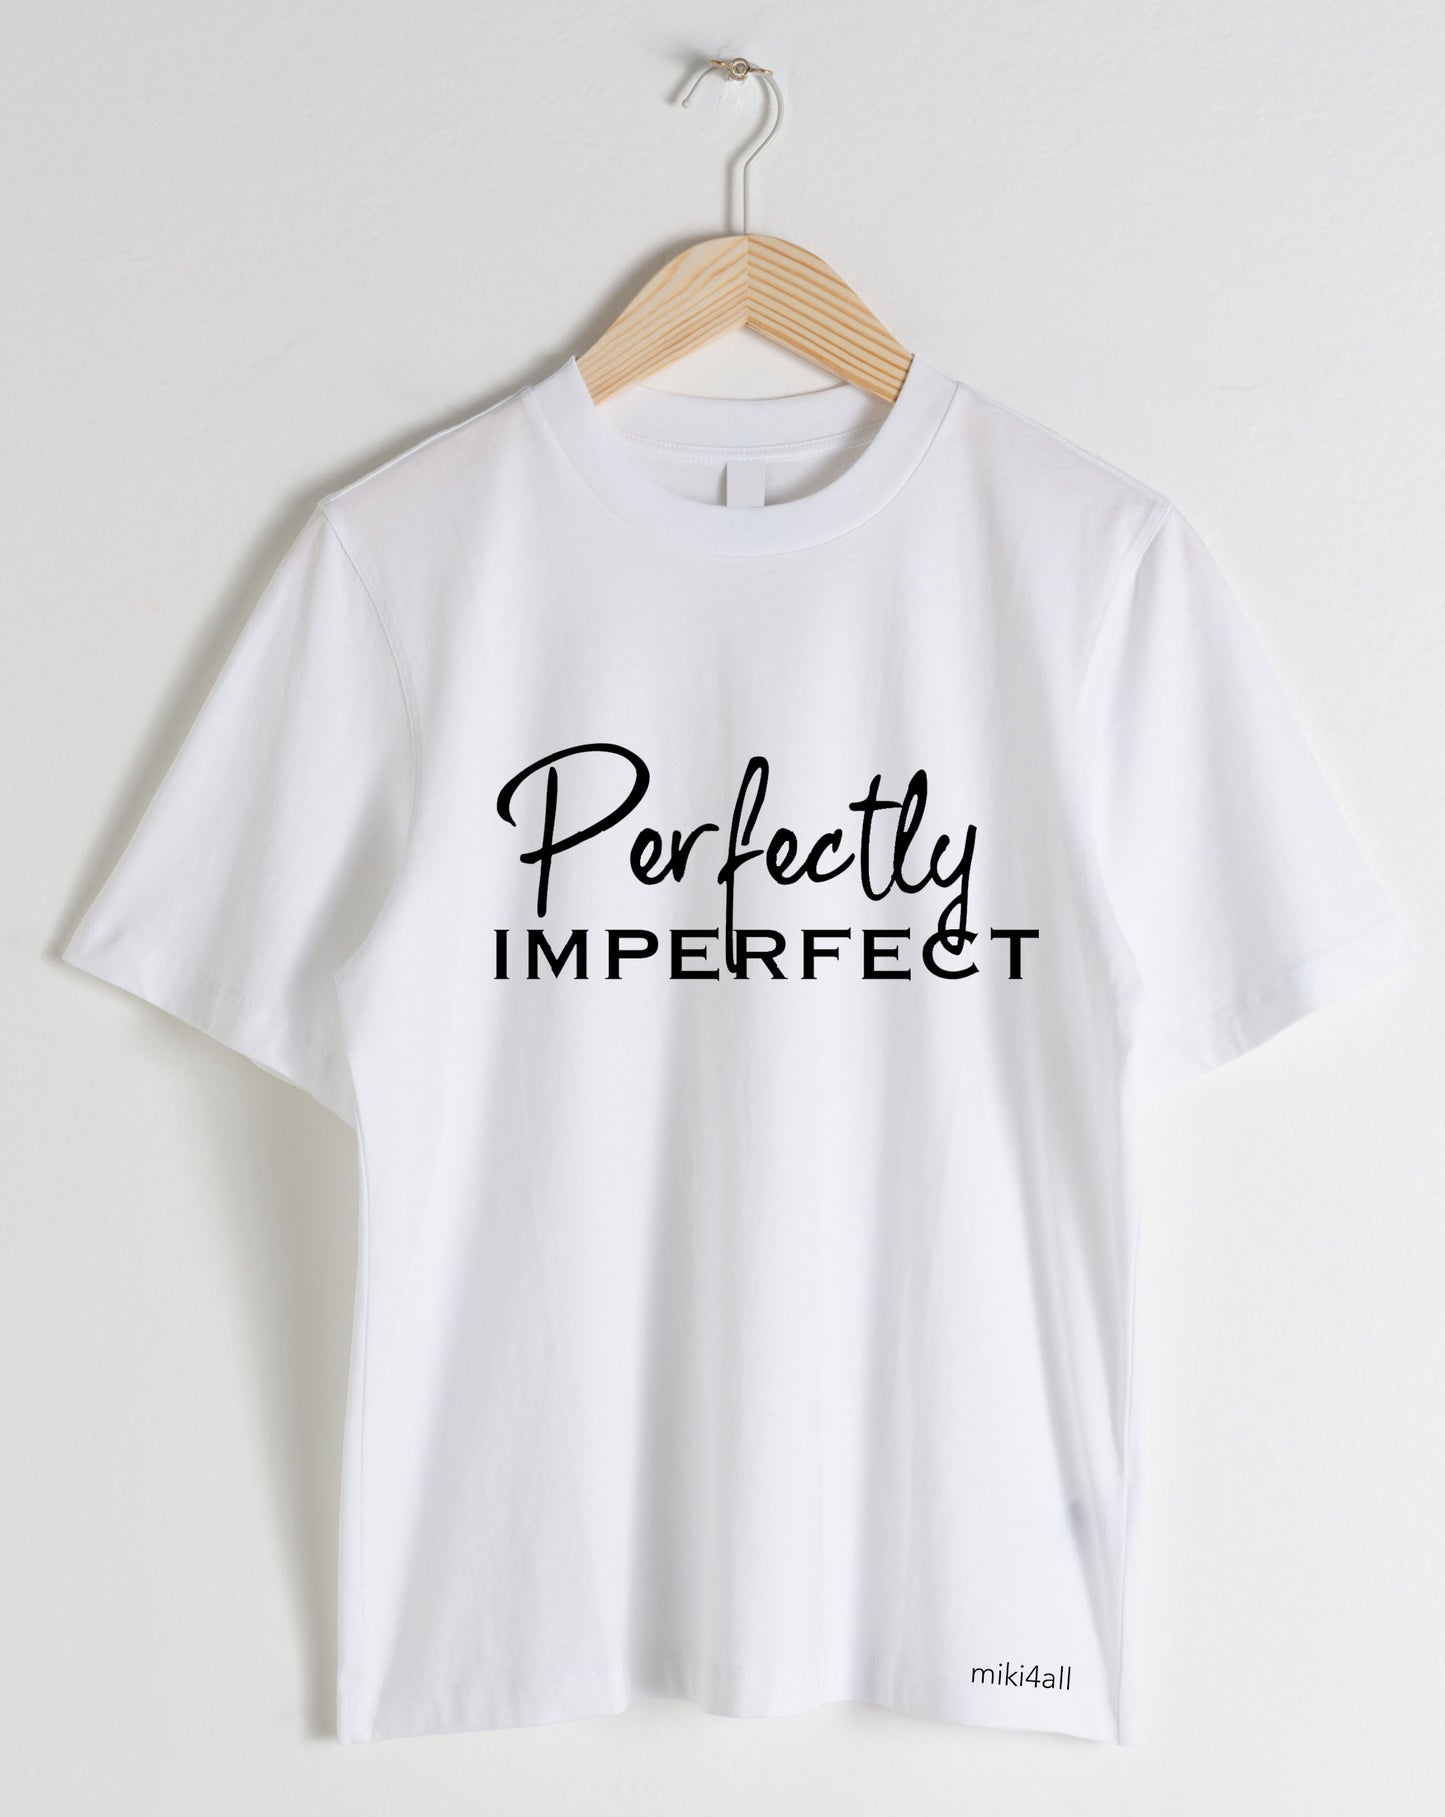 BABY t-shirt "Perfectly imperfect"